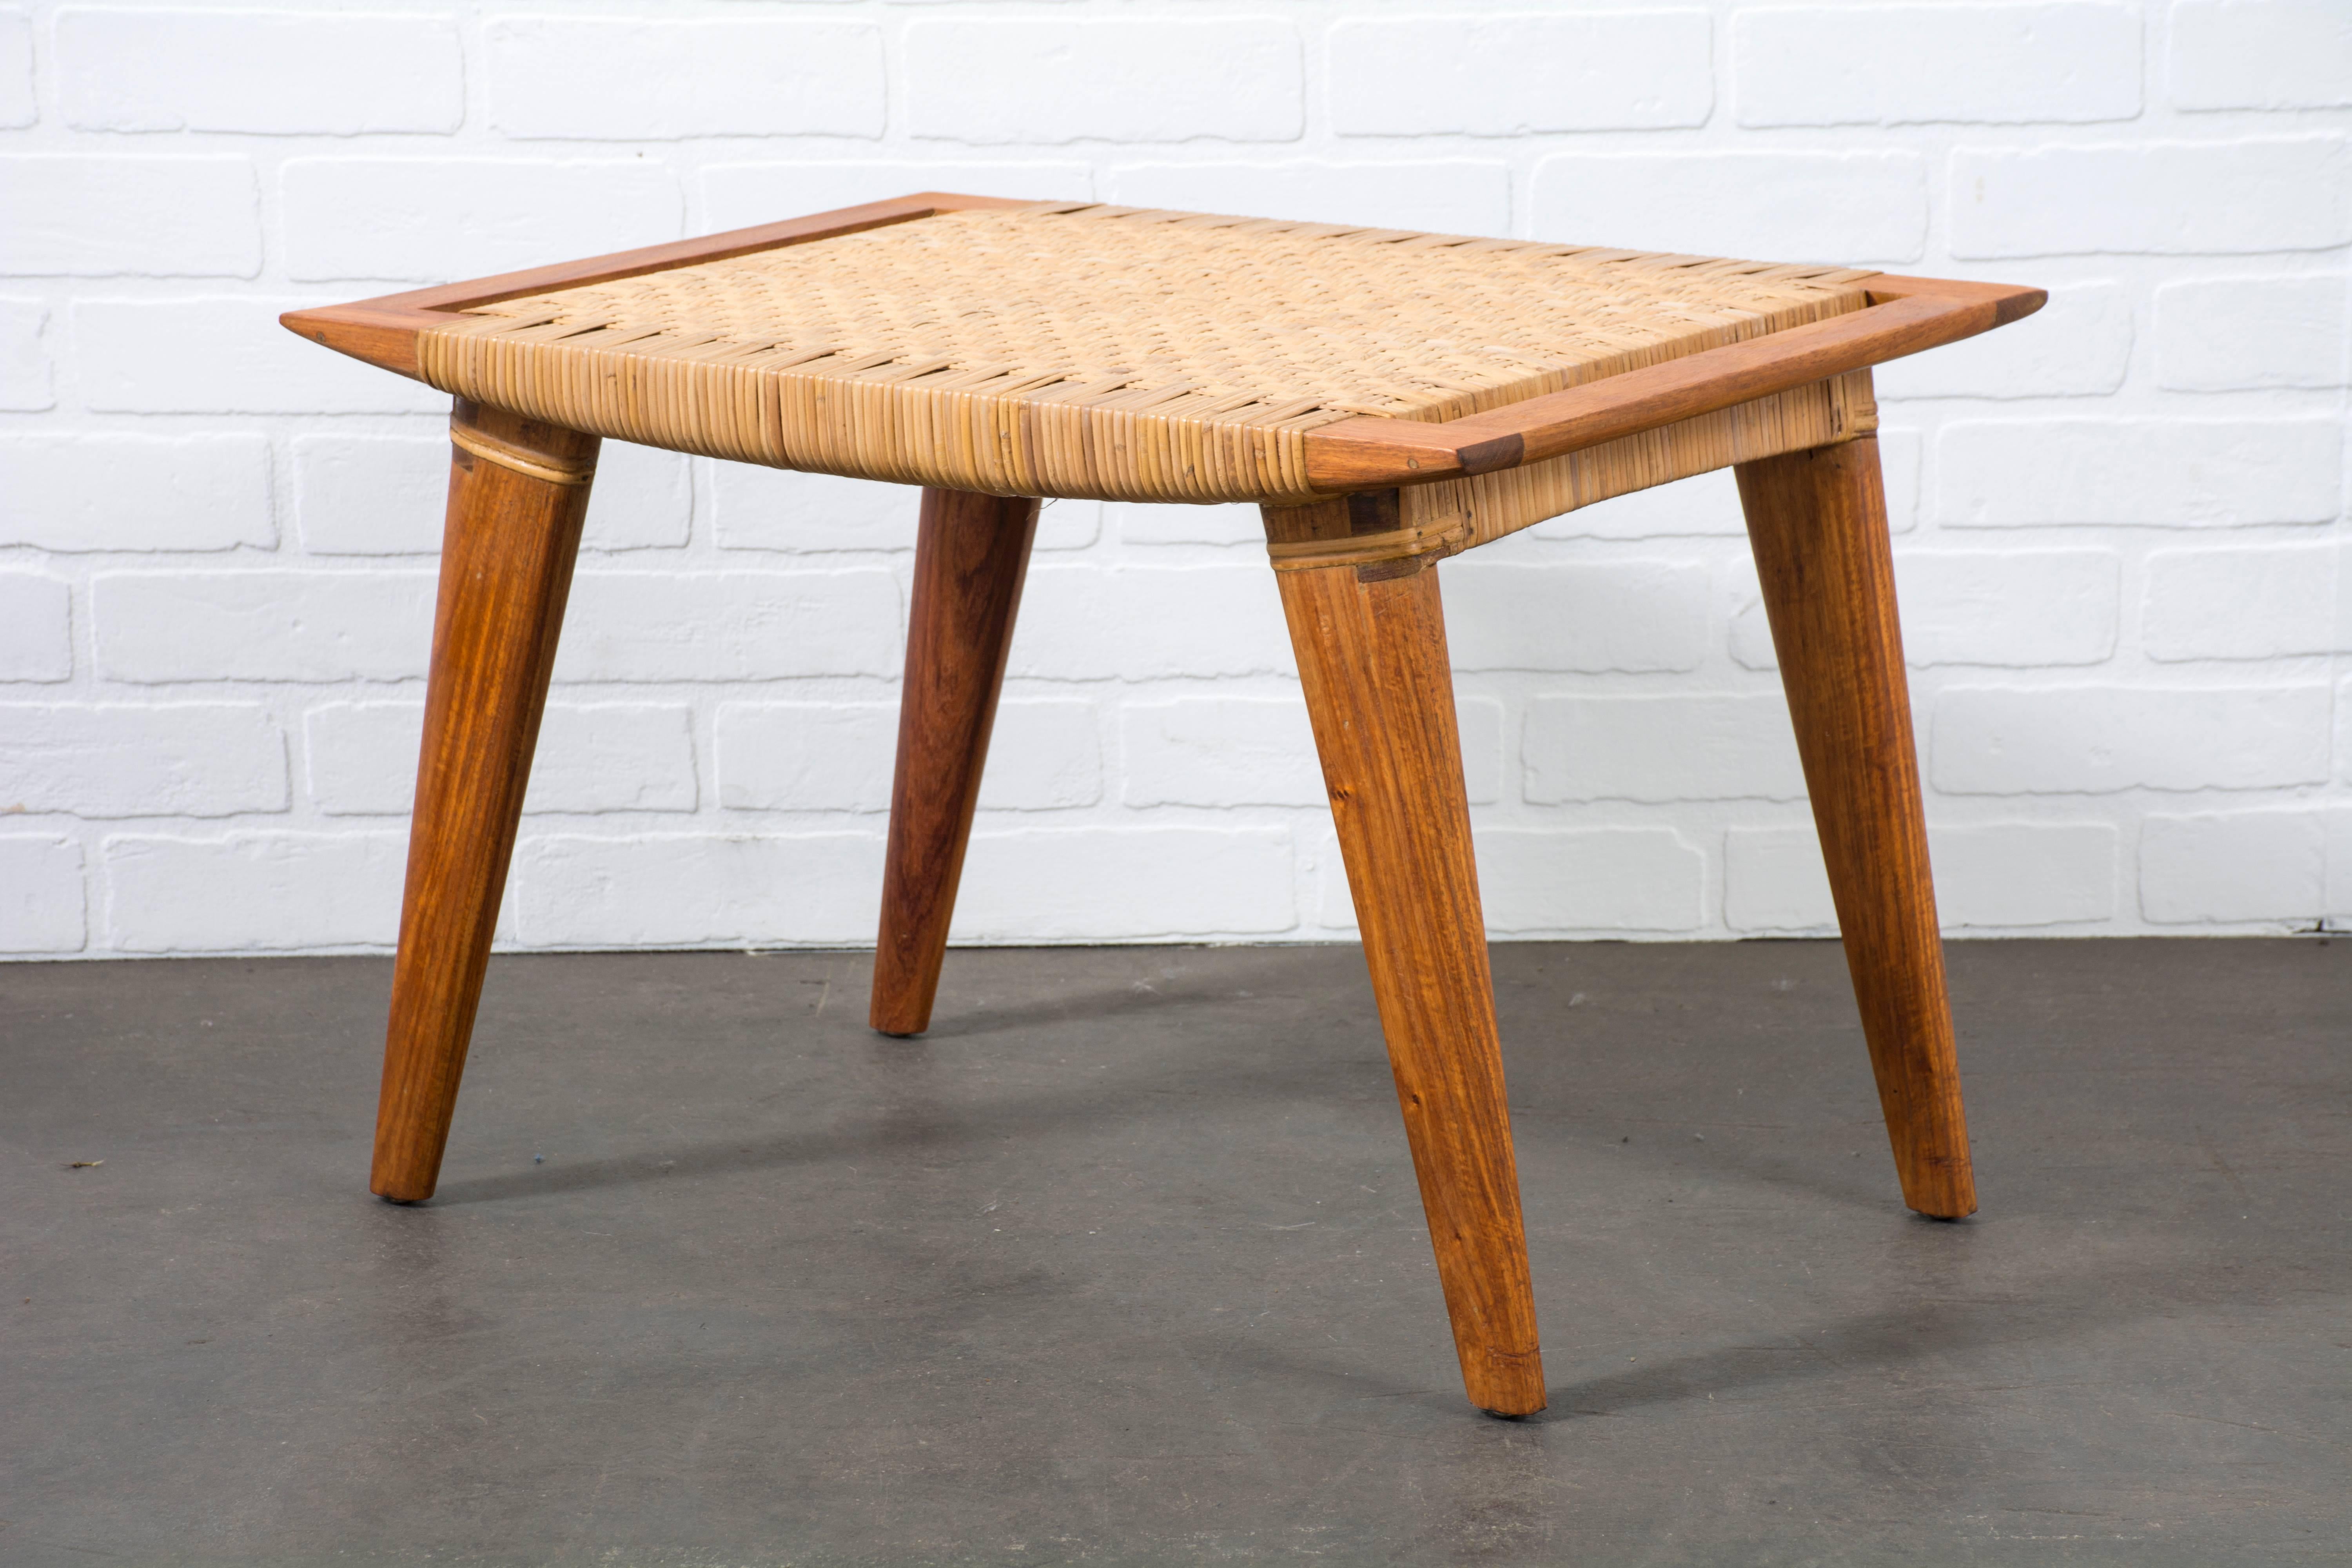 This is a Mid-Century Modern Dao wood and cane stool.